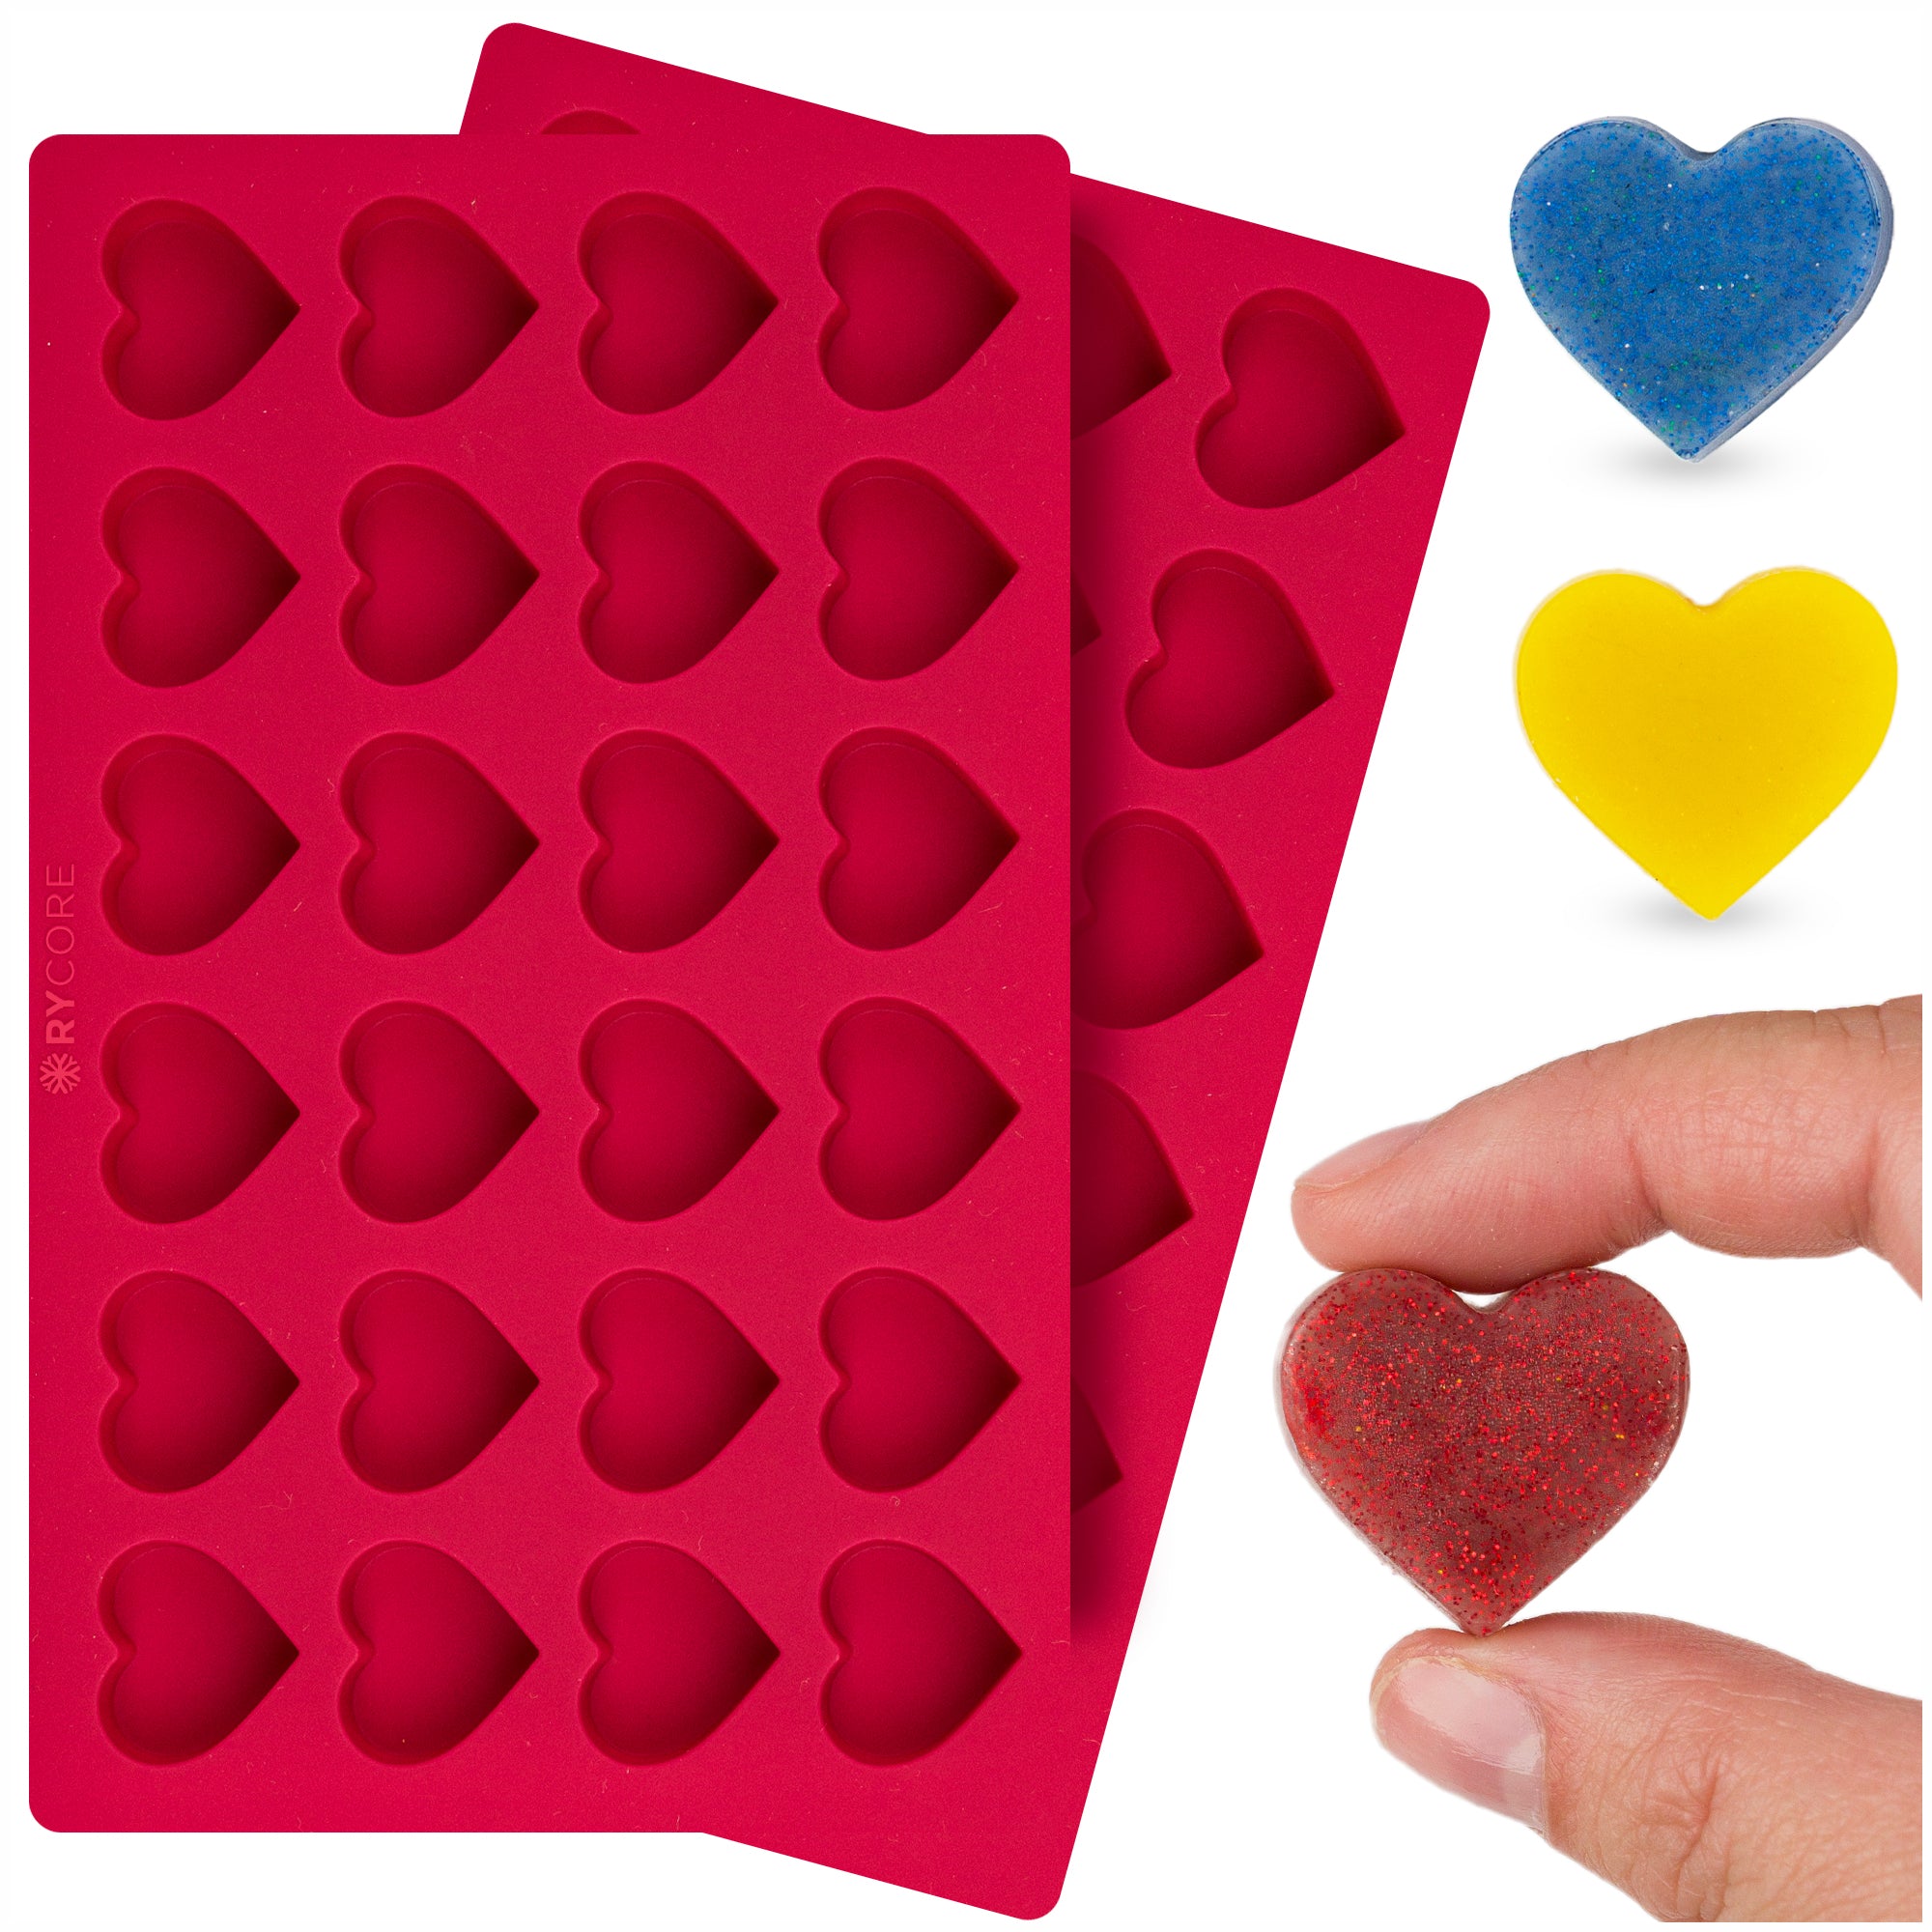 Small Heart Resin Mold Hearts Flexible Plastic Resin Molds Heart Fondant Mold  Heart Chocolate Mold Heart Jewelry Candle Wax Melt 